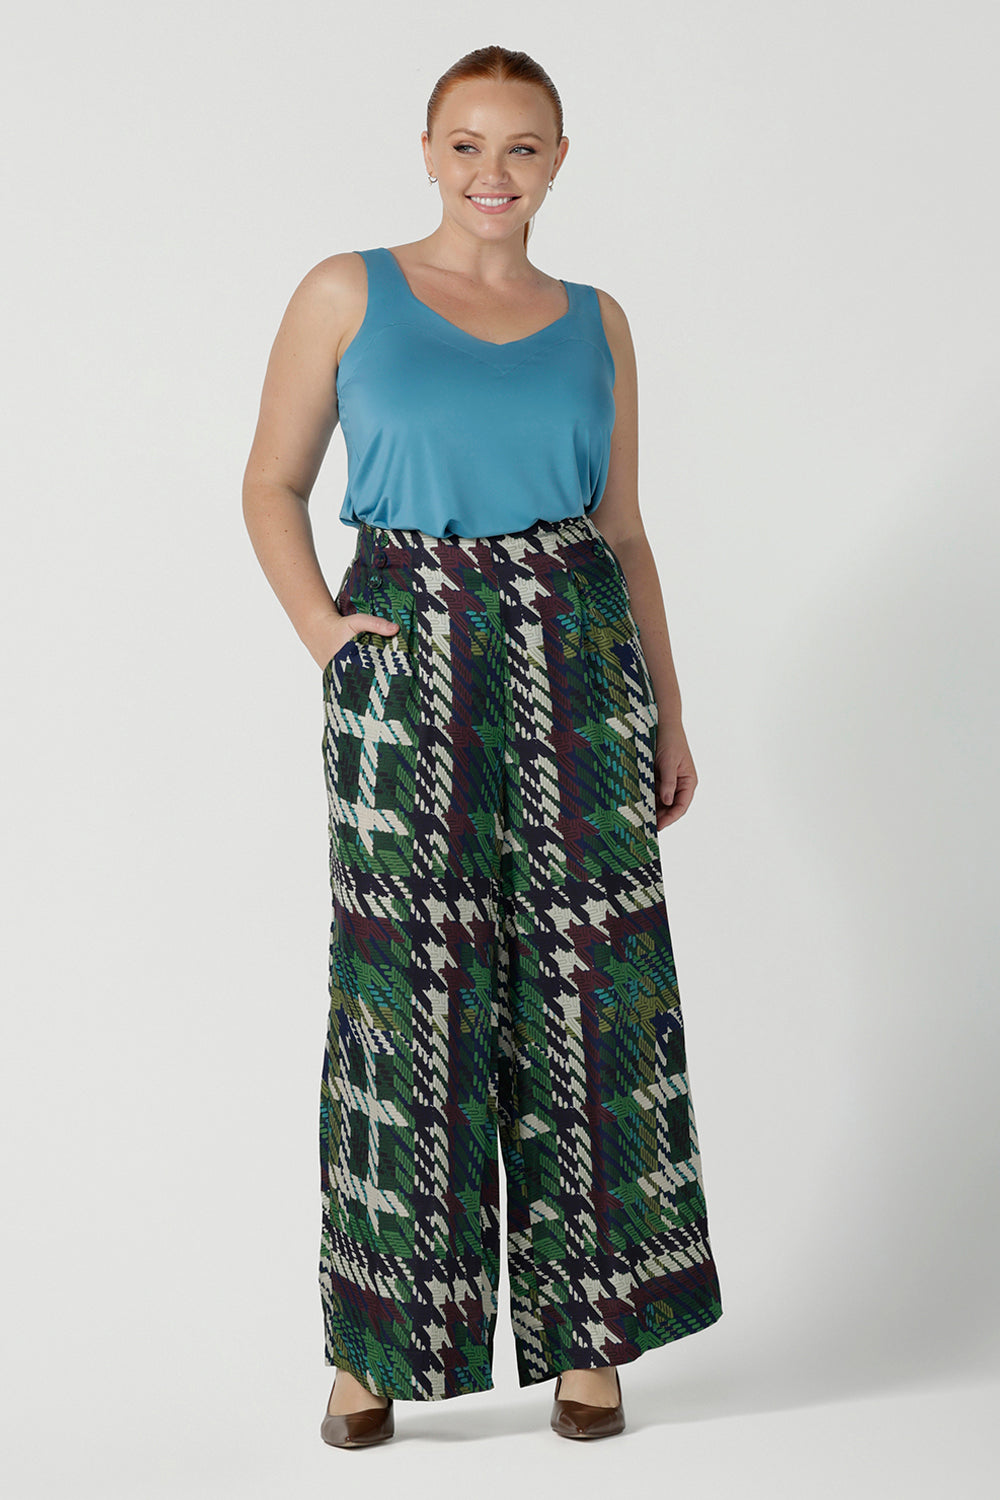 Size 12 Woman wearing the Eddy Cami in Mineral with wide straps. Styled back with the Ellery pant in Houndstooth. Made in Australia for women size 8 - 24. 